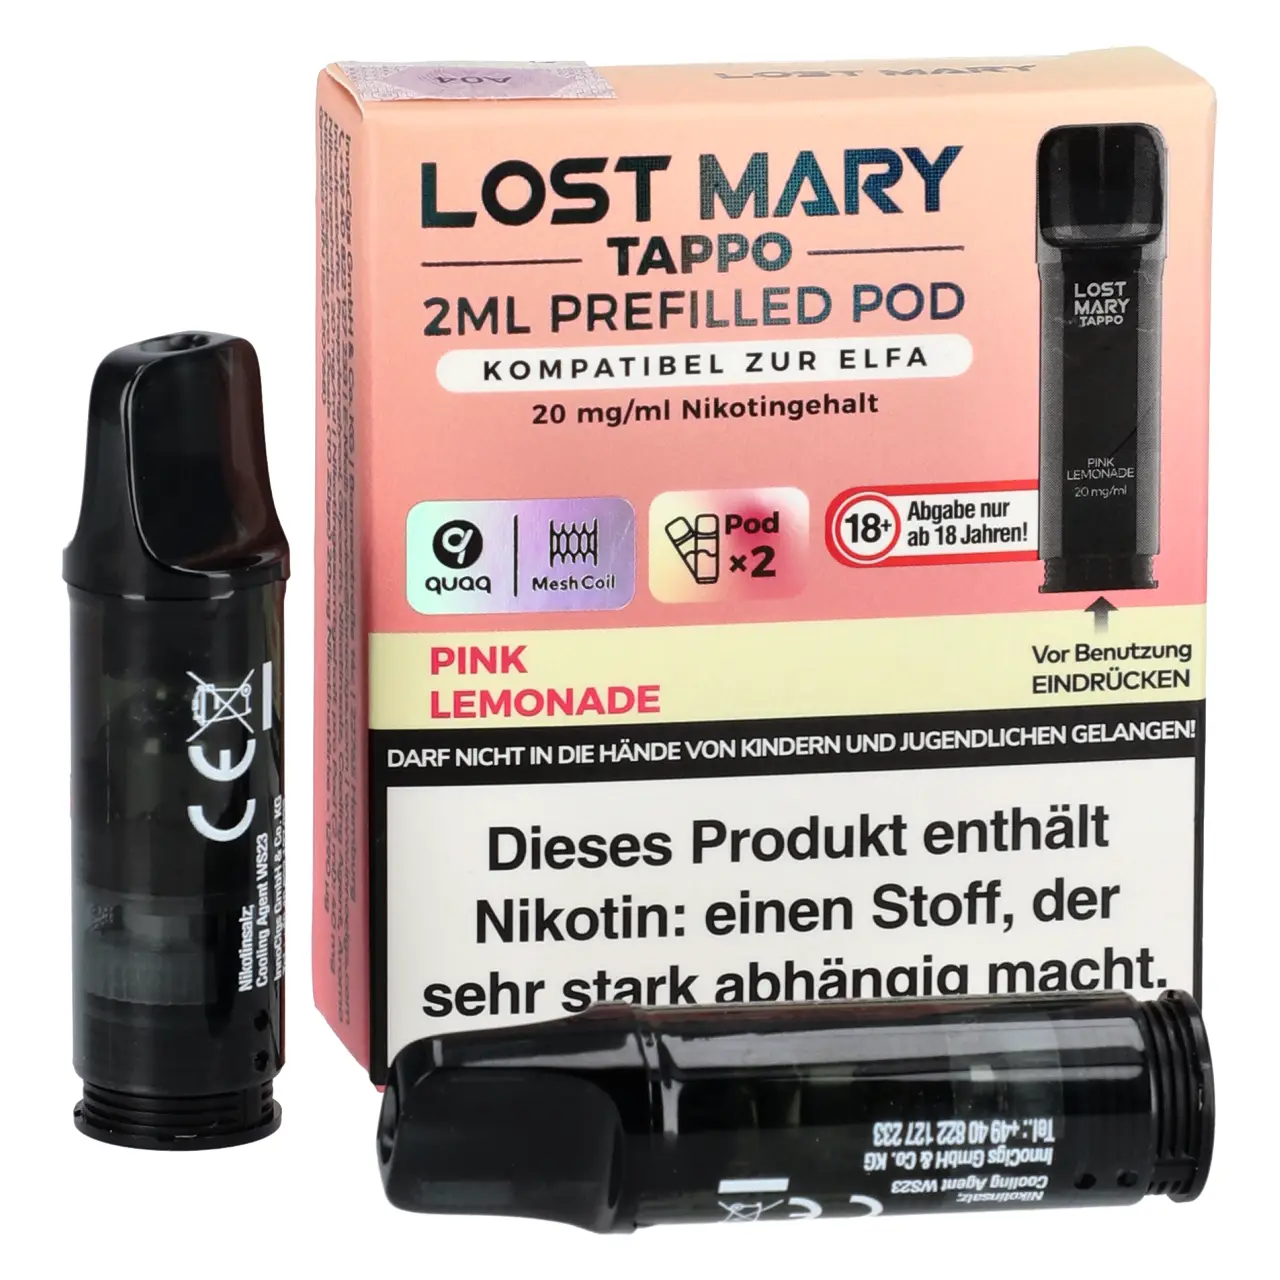 Lost Mary Tappo Prefilled Pod - Pink Lemonade - 2er Packung